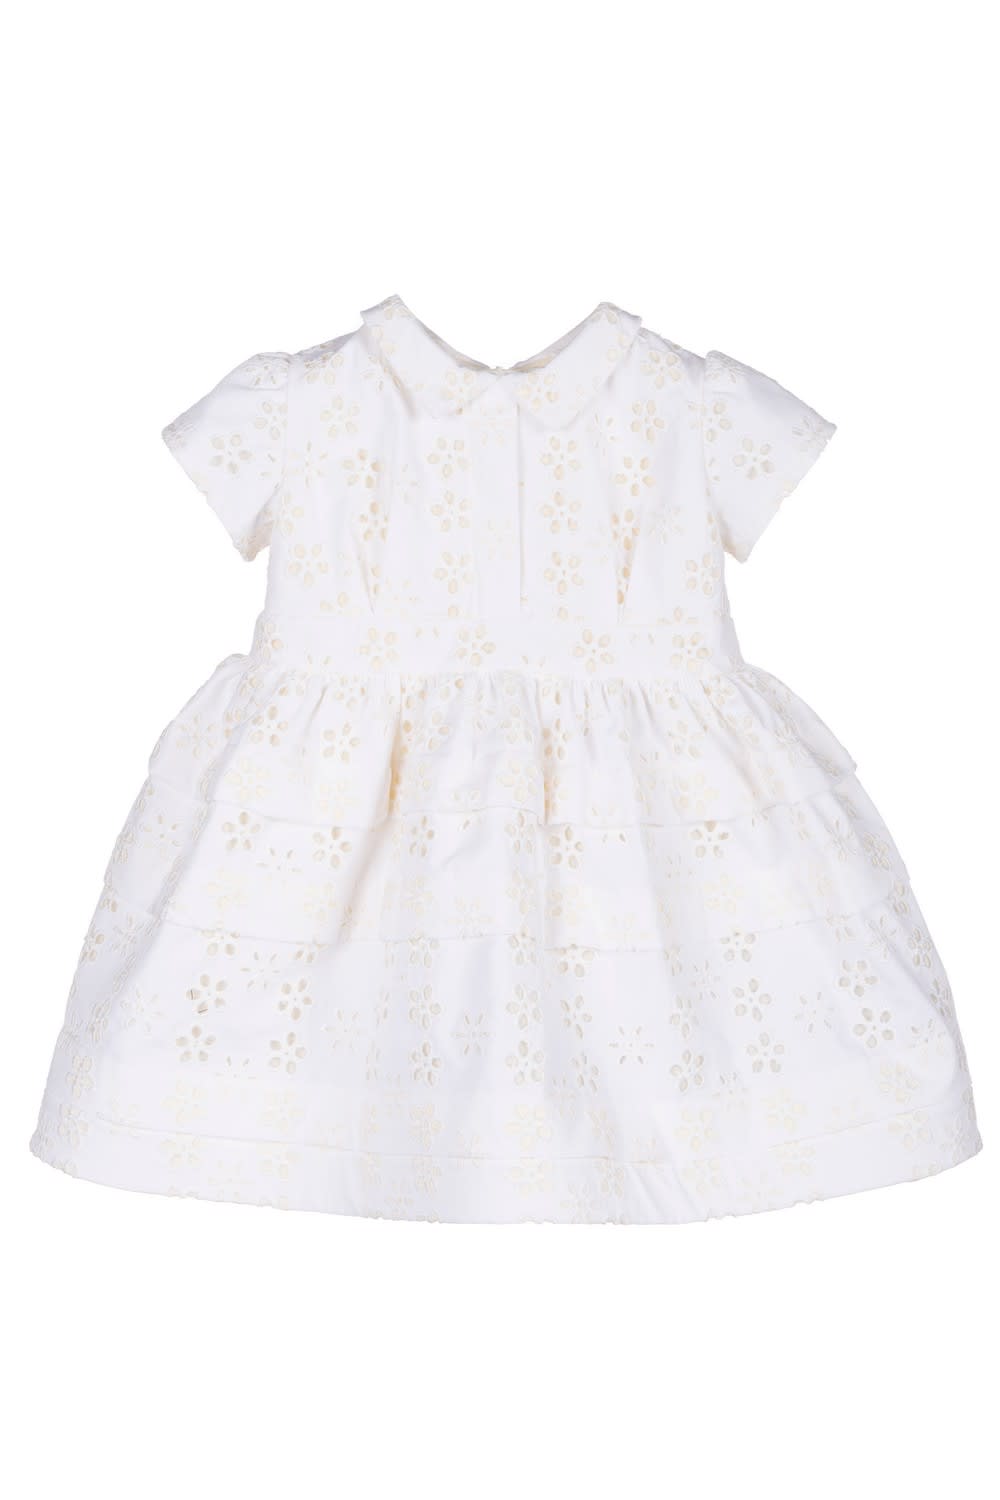 Mimisol Babies' Embroidered Dress In White